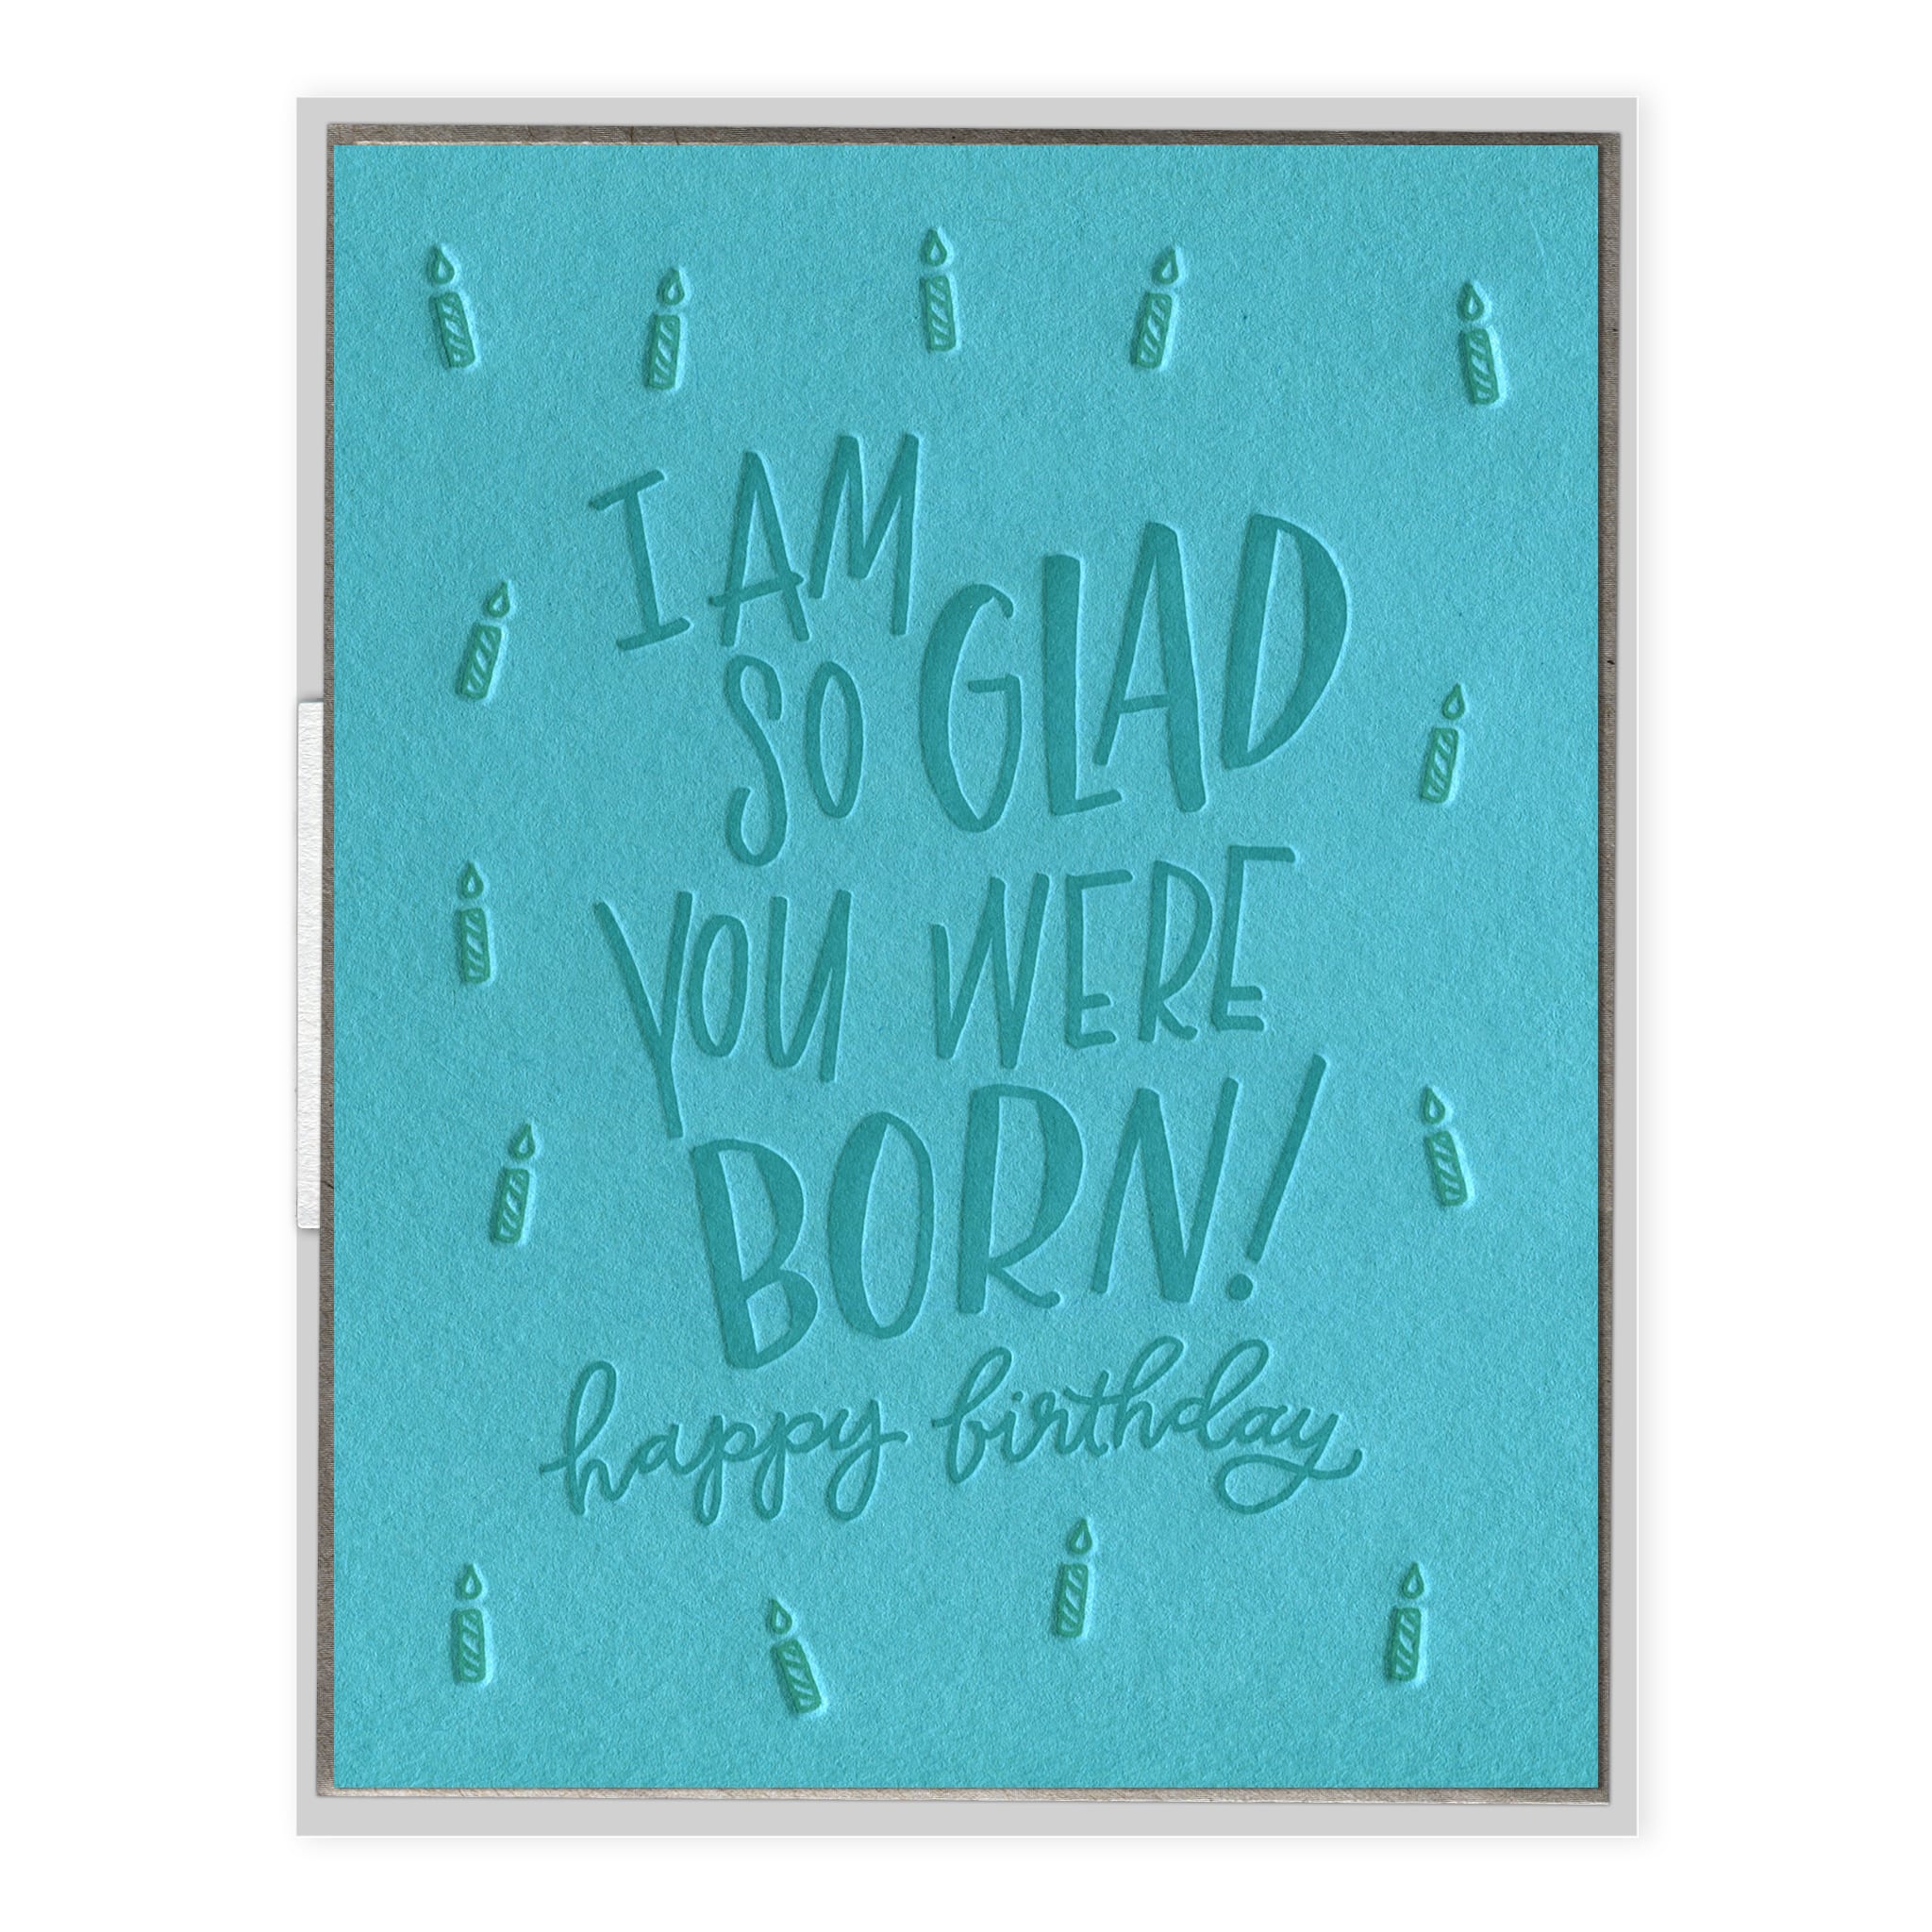 So Glad You Were Born – INK MEETS PAPER® Wholesale